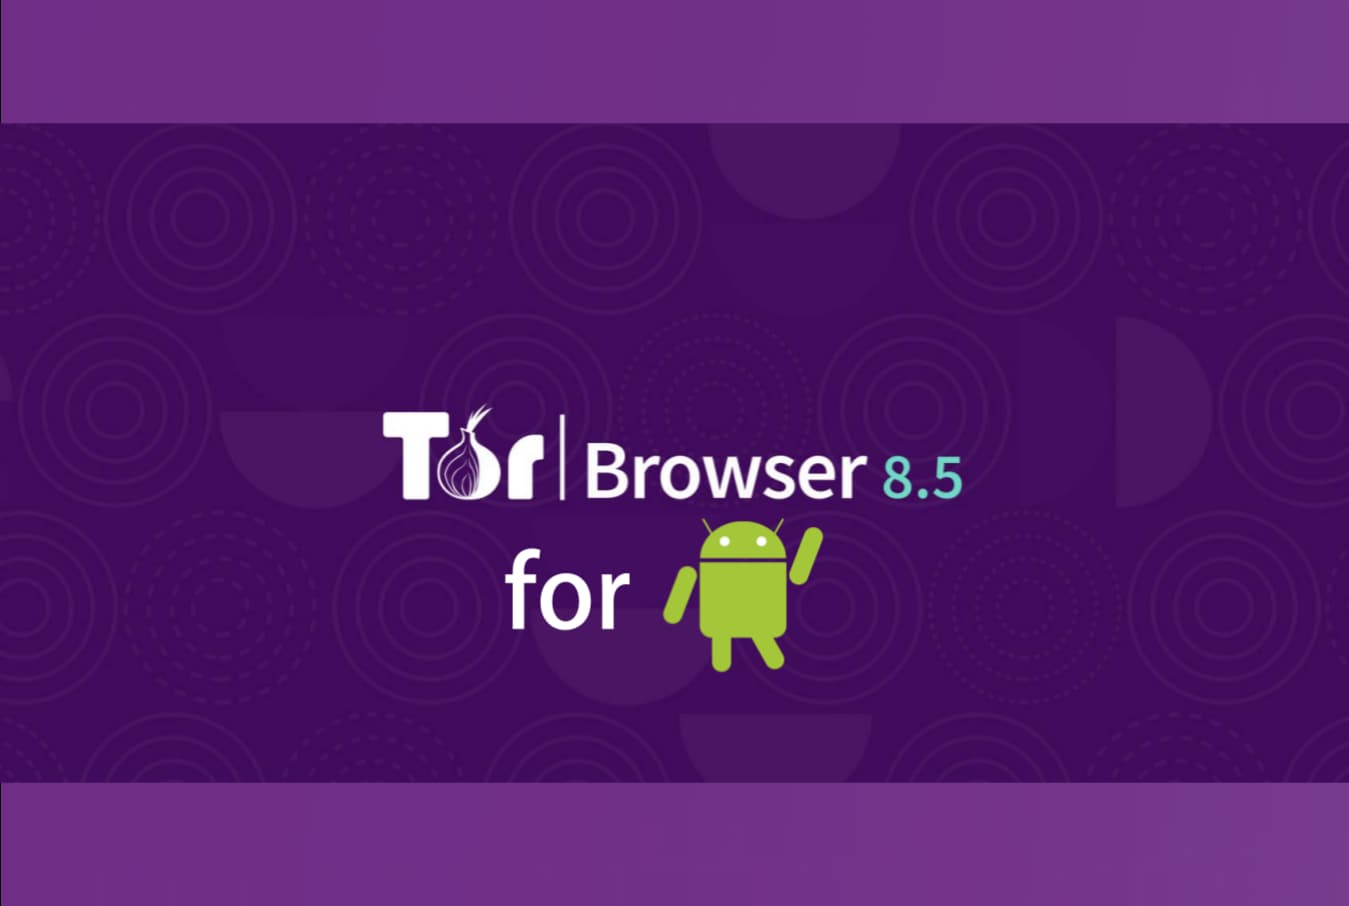 Download official version of Tor browser on Android devices